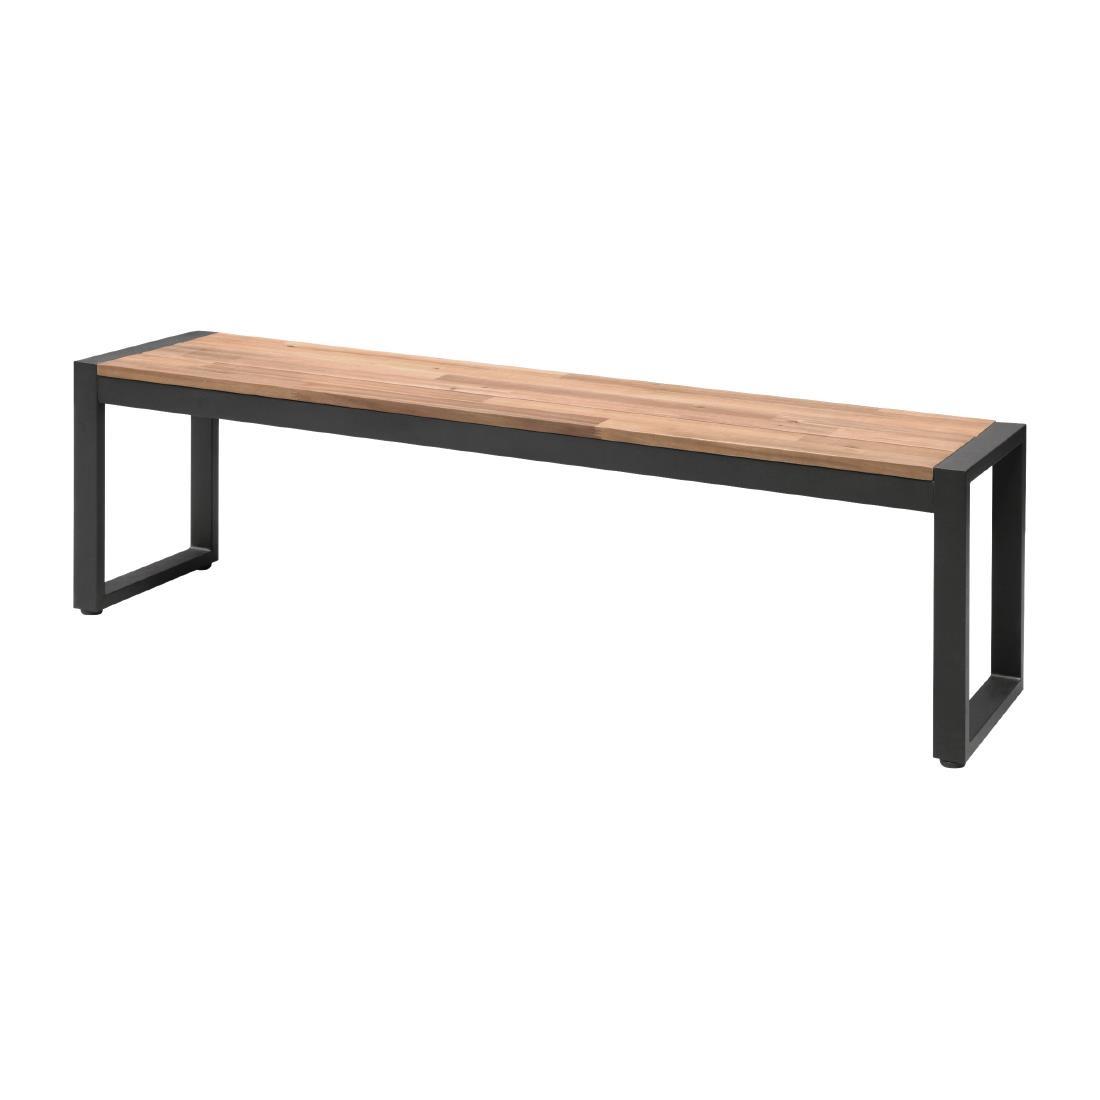 Bolero Acacia Wood and Steel Industrial Benches 1600mm (Pack of 2) - DS158  - 1